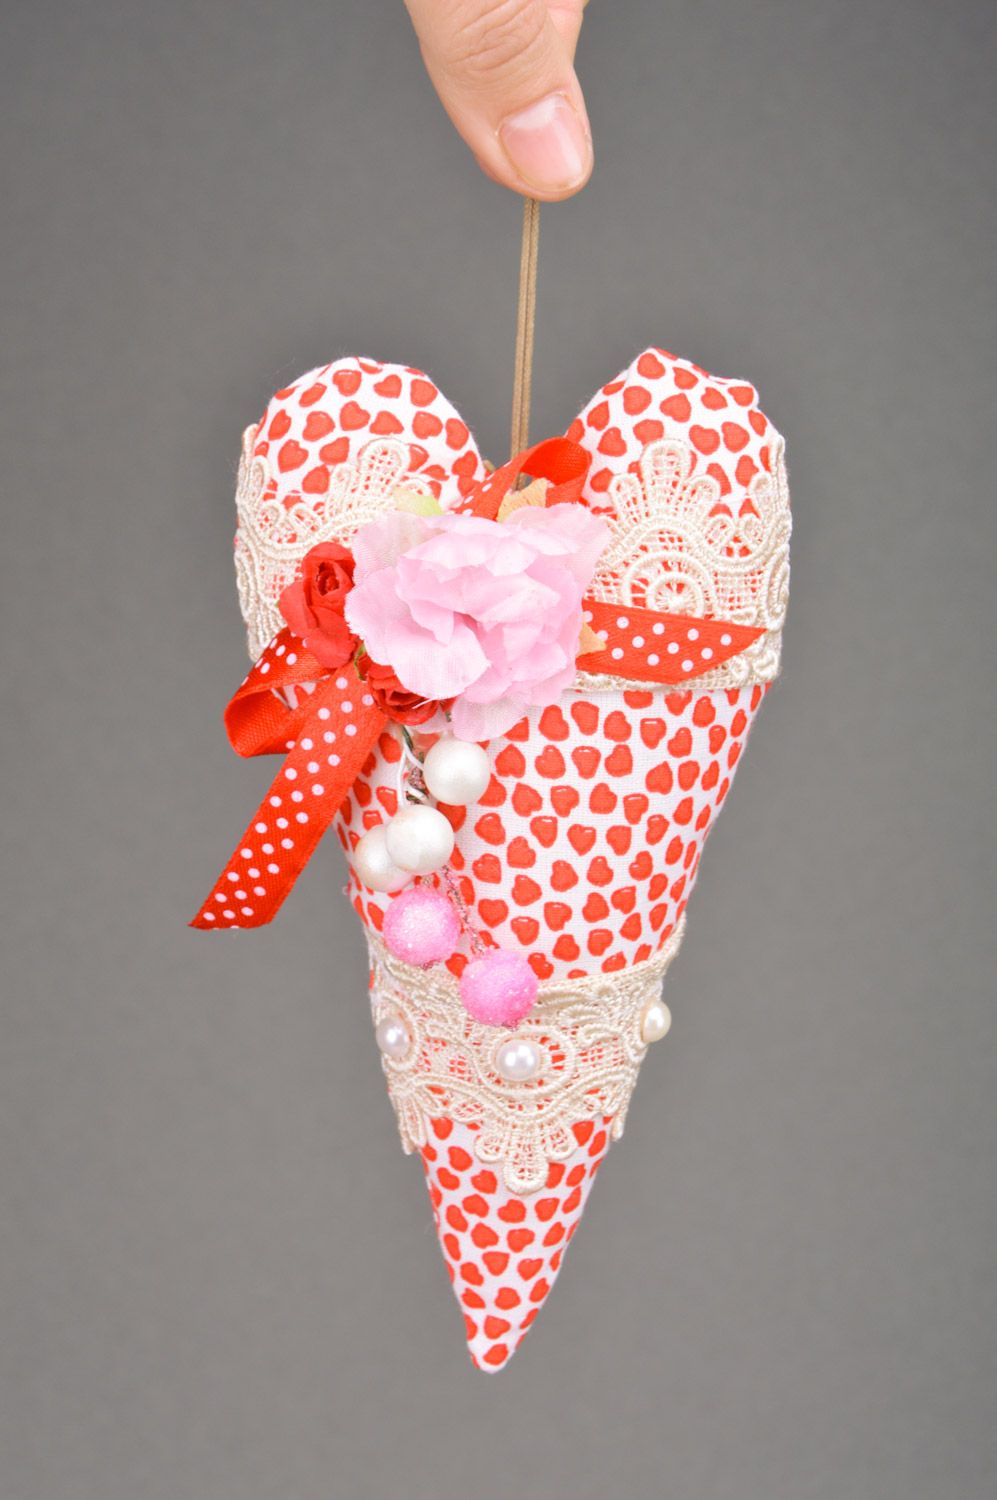 Handmade heart-shaped decorative wall hanging decoration sewn of cotton with lace photo 2